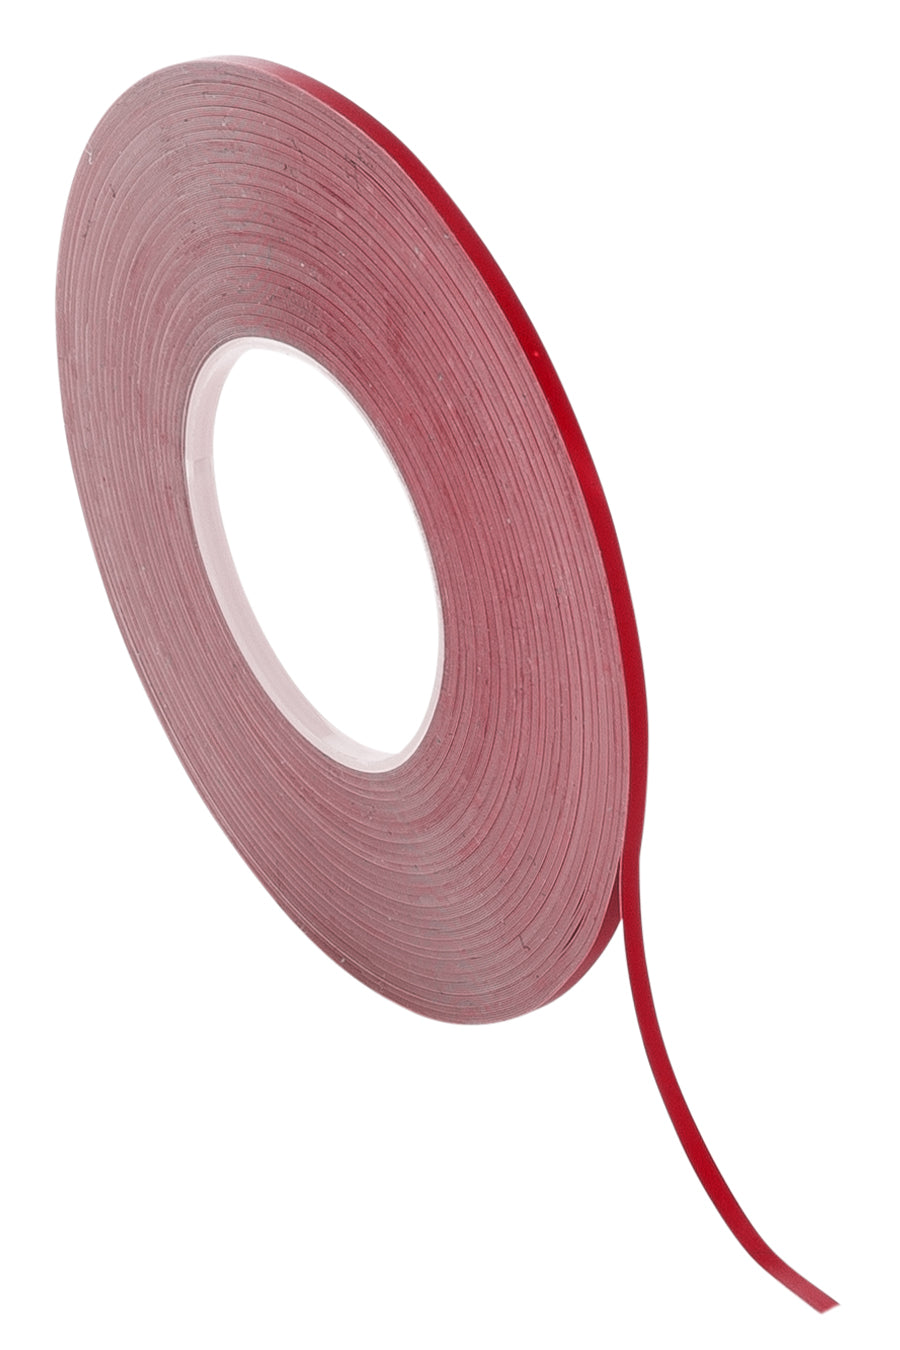 Chartpak 1/16" x 648" Red Glossy Tape